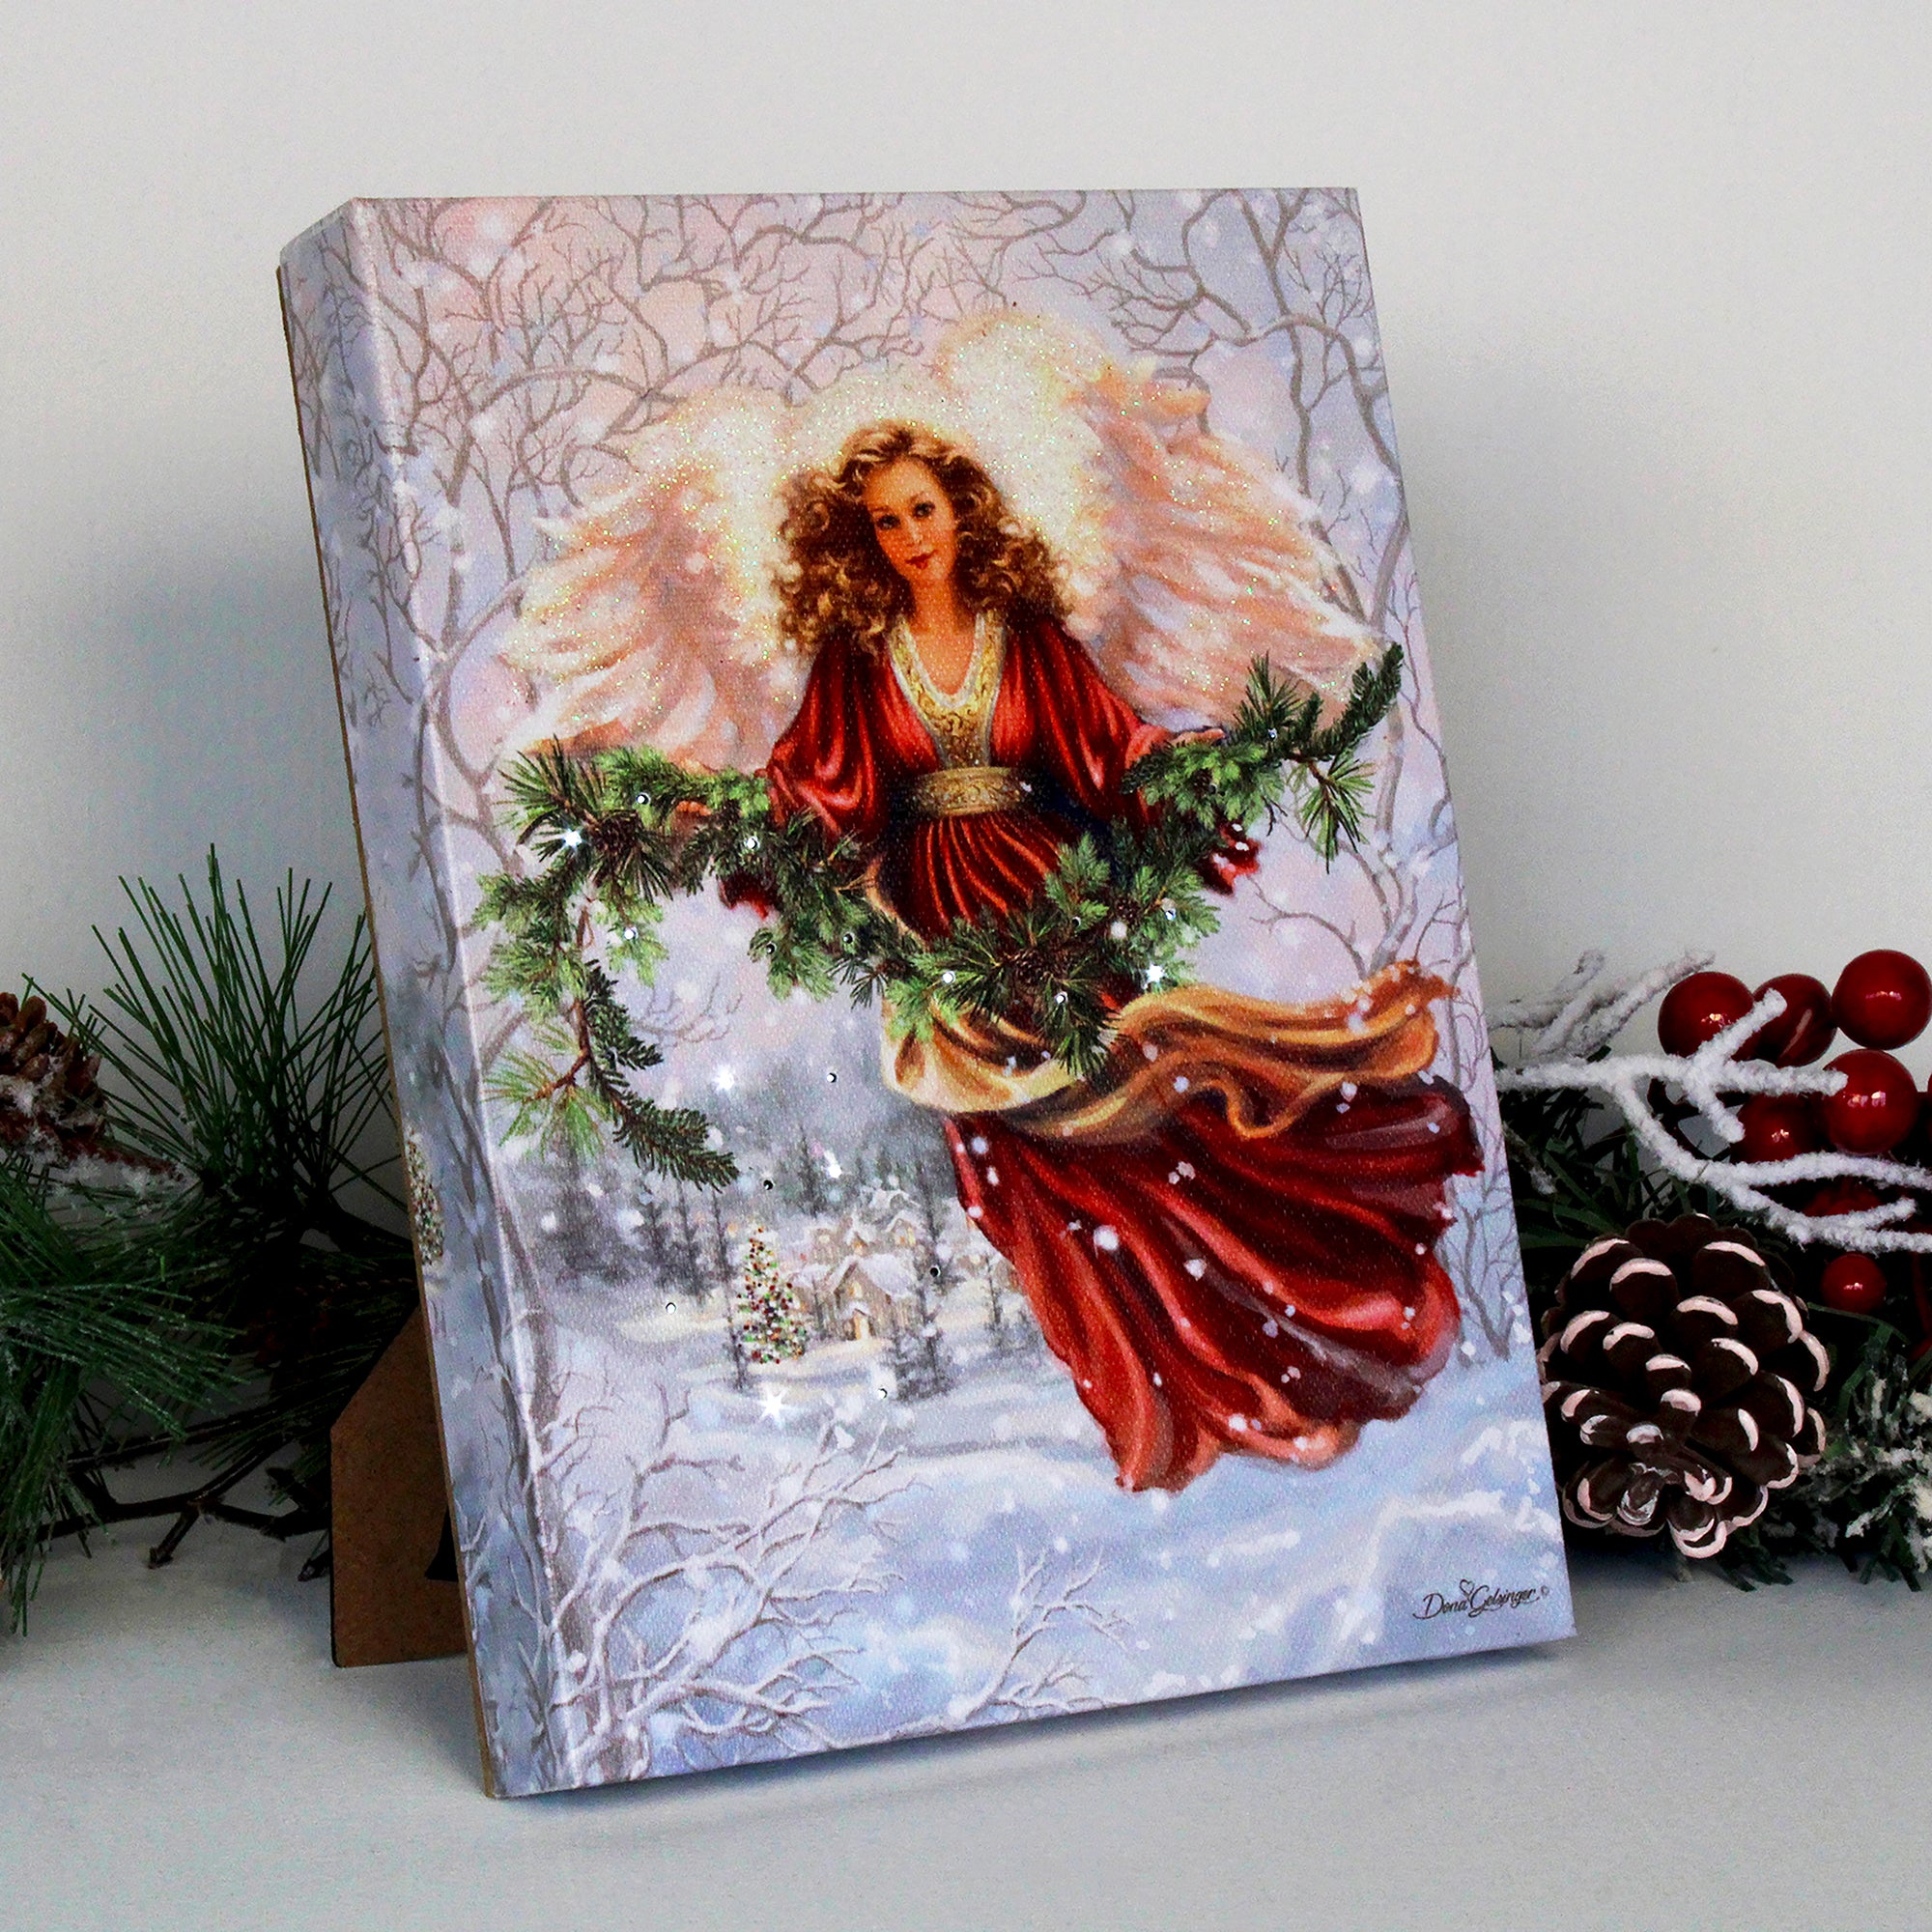 This captivating canvas features an angel dressed in a stunning red gown, with her wings majestically outspread and a garland delicately held in her hand. Behind her, a charming snow-covered town twinkles in the soft light of the falling snow.